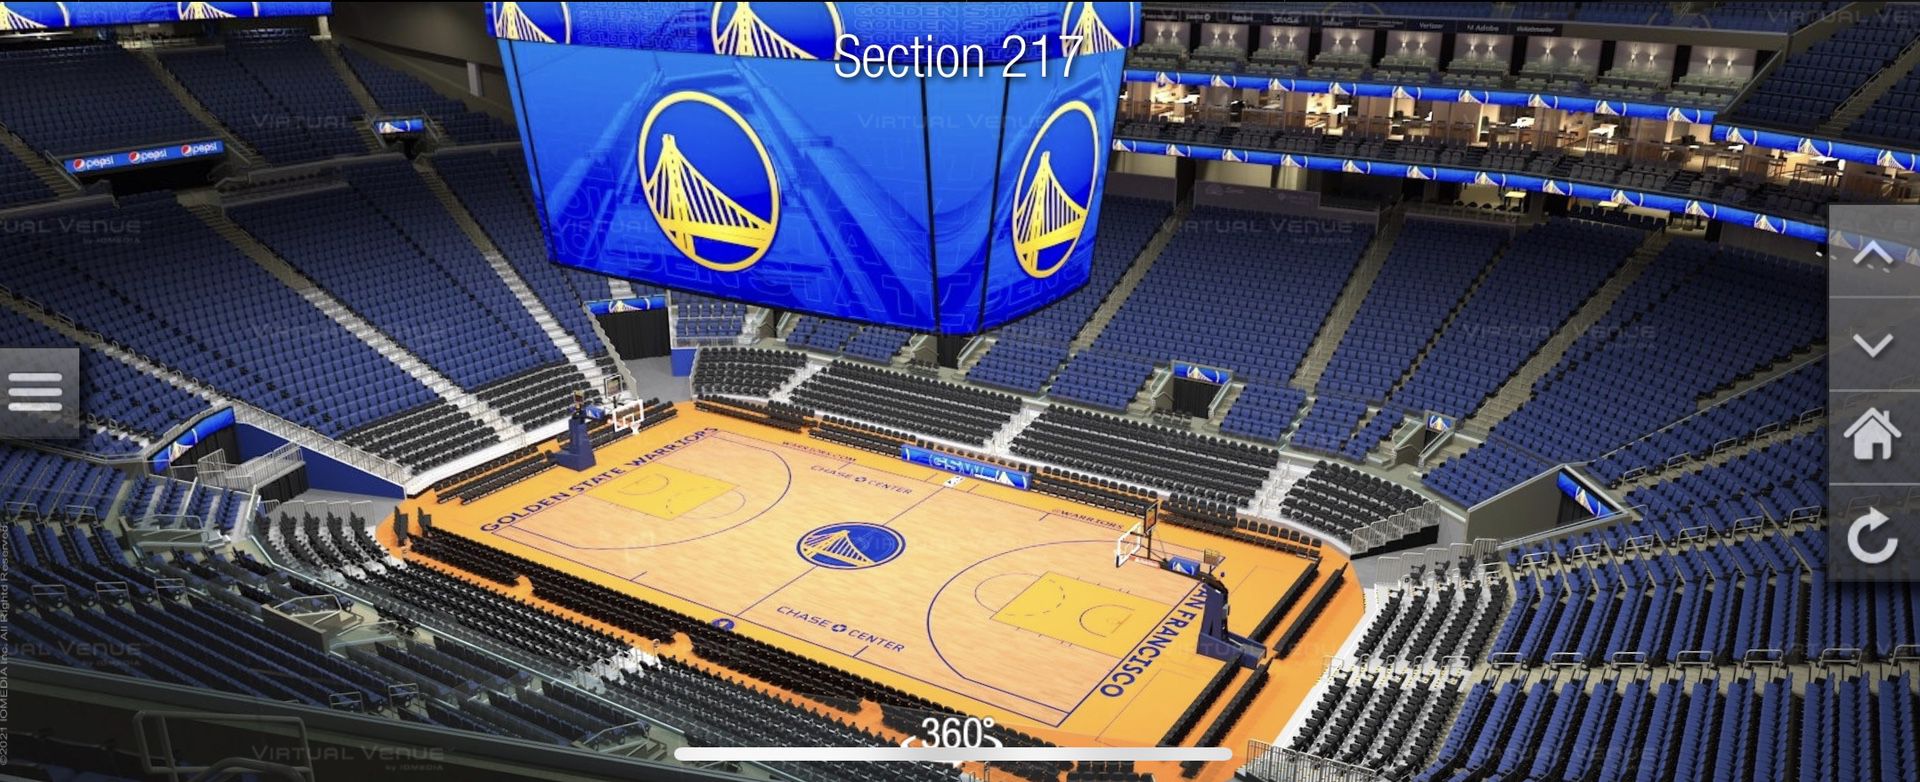 Warriors vs Clippers 2 Tickets Chase Center